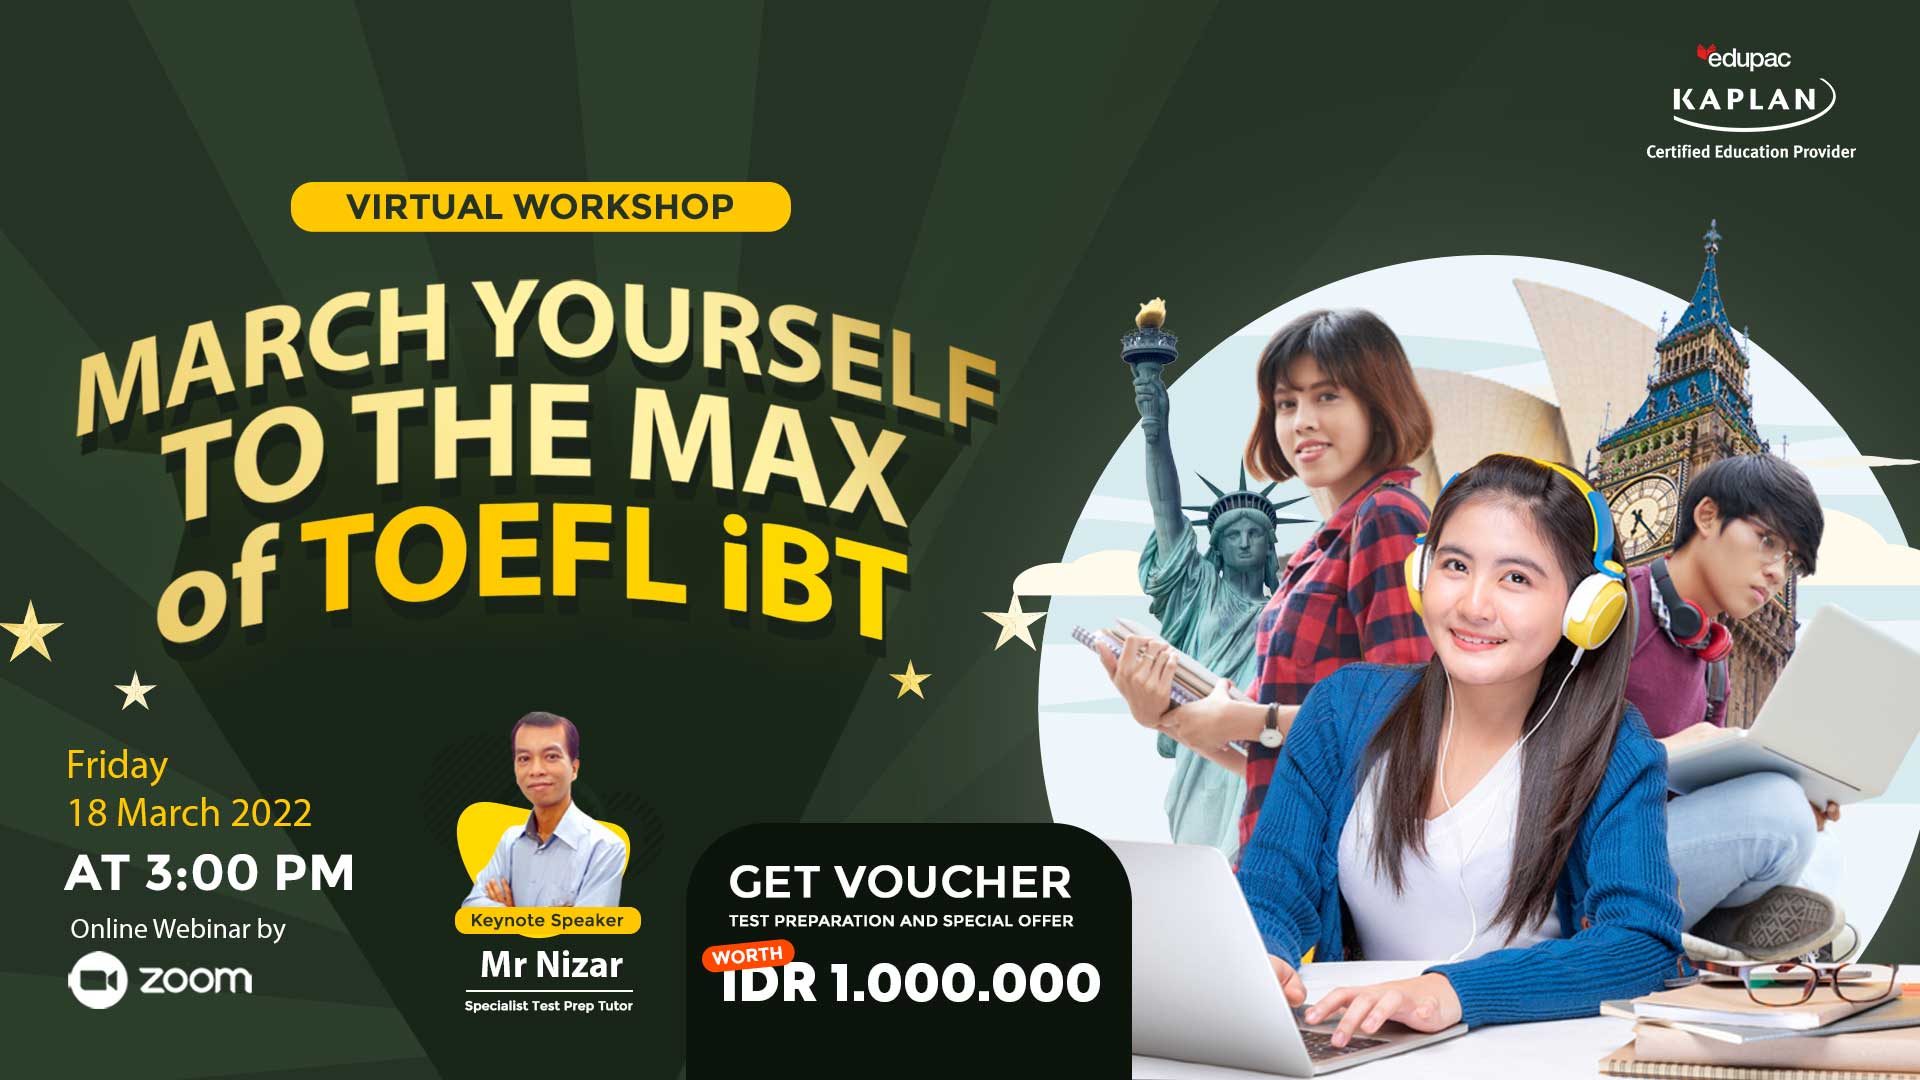 Webinar Free Virtual Workshop "March Yourself to The Max of TOEFL iBT" 